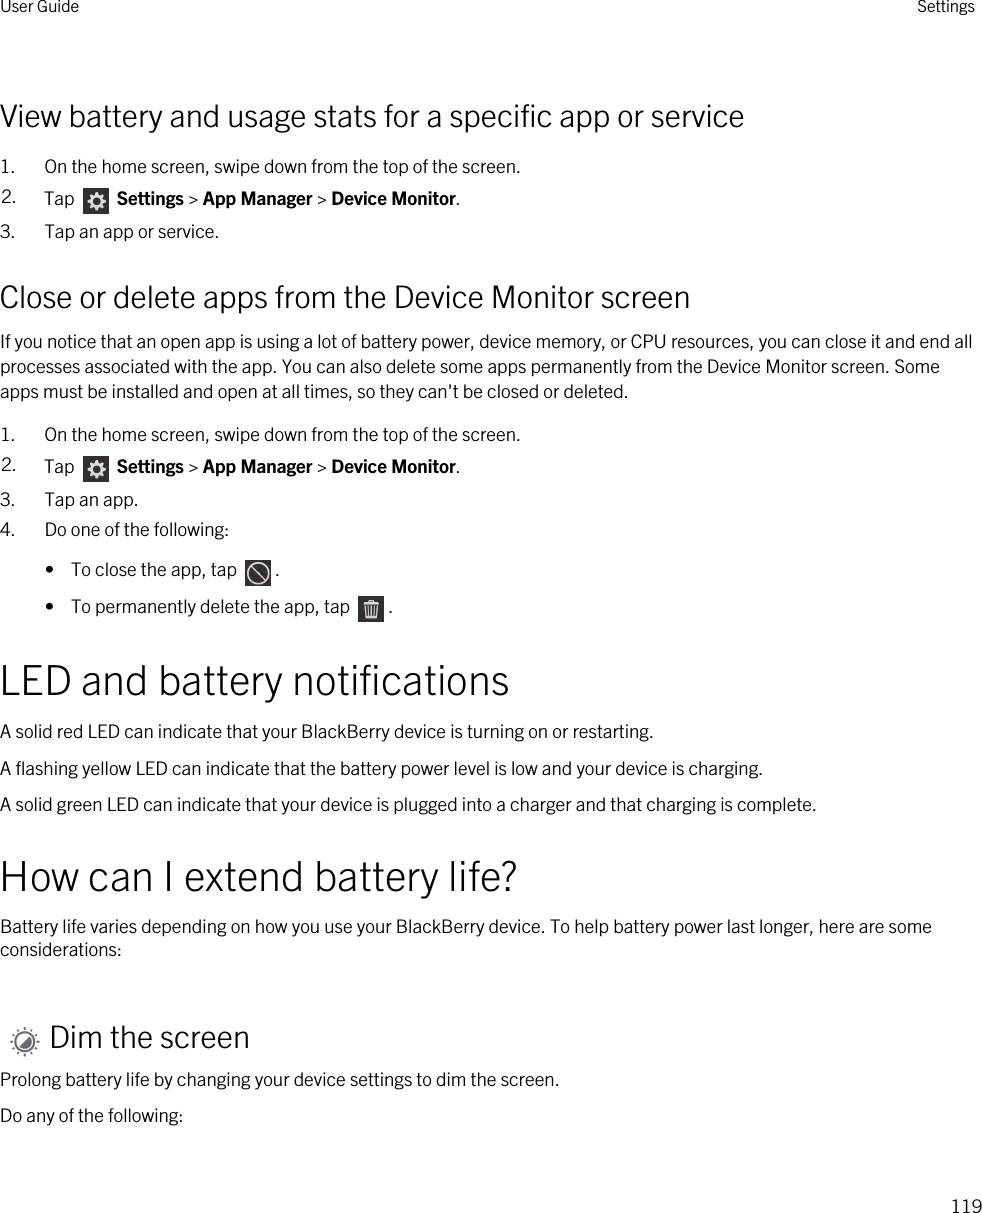 View battery and usage stats for a specific app or service1. On the home screen, swipe down from the top of the screen.2. Tap   Settings &gt; App Manager &gt; Device Monitor.3. Tap an app or service.Close or delete apps from the Device Monitor screenIf you notice that an open app is using a lot of battery power, device memory, or CPU resources, you can close it and end all processes associated with the app. You can also delete some apps permanently from the Device Monitor screen. Some apps must be installed and open at all times, so they can&apos;t be closed or deleted.1. On the home screen, swipe down from the top of the screen.2. Tap   Settings &gt; App Manager &gt; Device Monitor.3. Tap an app.4. Do one of the following:•  To close the app, tap  .•  To permanently delete the app, tap  .LED and battery notificationsA solid red LED can indicate that your BlackBerry device is turning on or restarting.A flashing yellow LED can indicate that the battery power level is low and your device is charging.A solid green LED can indicate that your device is plugged into a charger and that charging is complete.How can I extend battery life?Battery life varies depending on how you use your BlackBerry device. To help battery power last longer, here are some considerations:Dim the screenProlong battery life by changing your device settings to dim the screen.Do any of the following:User Guide Settings119